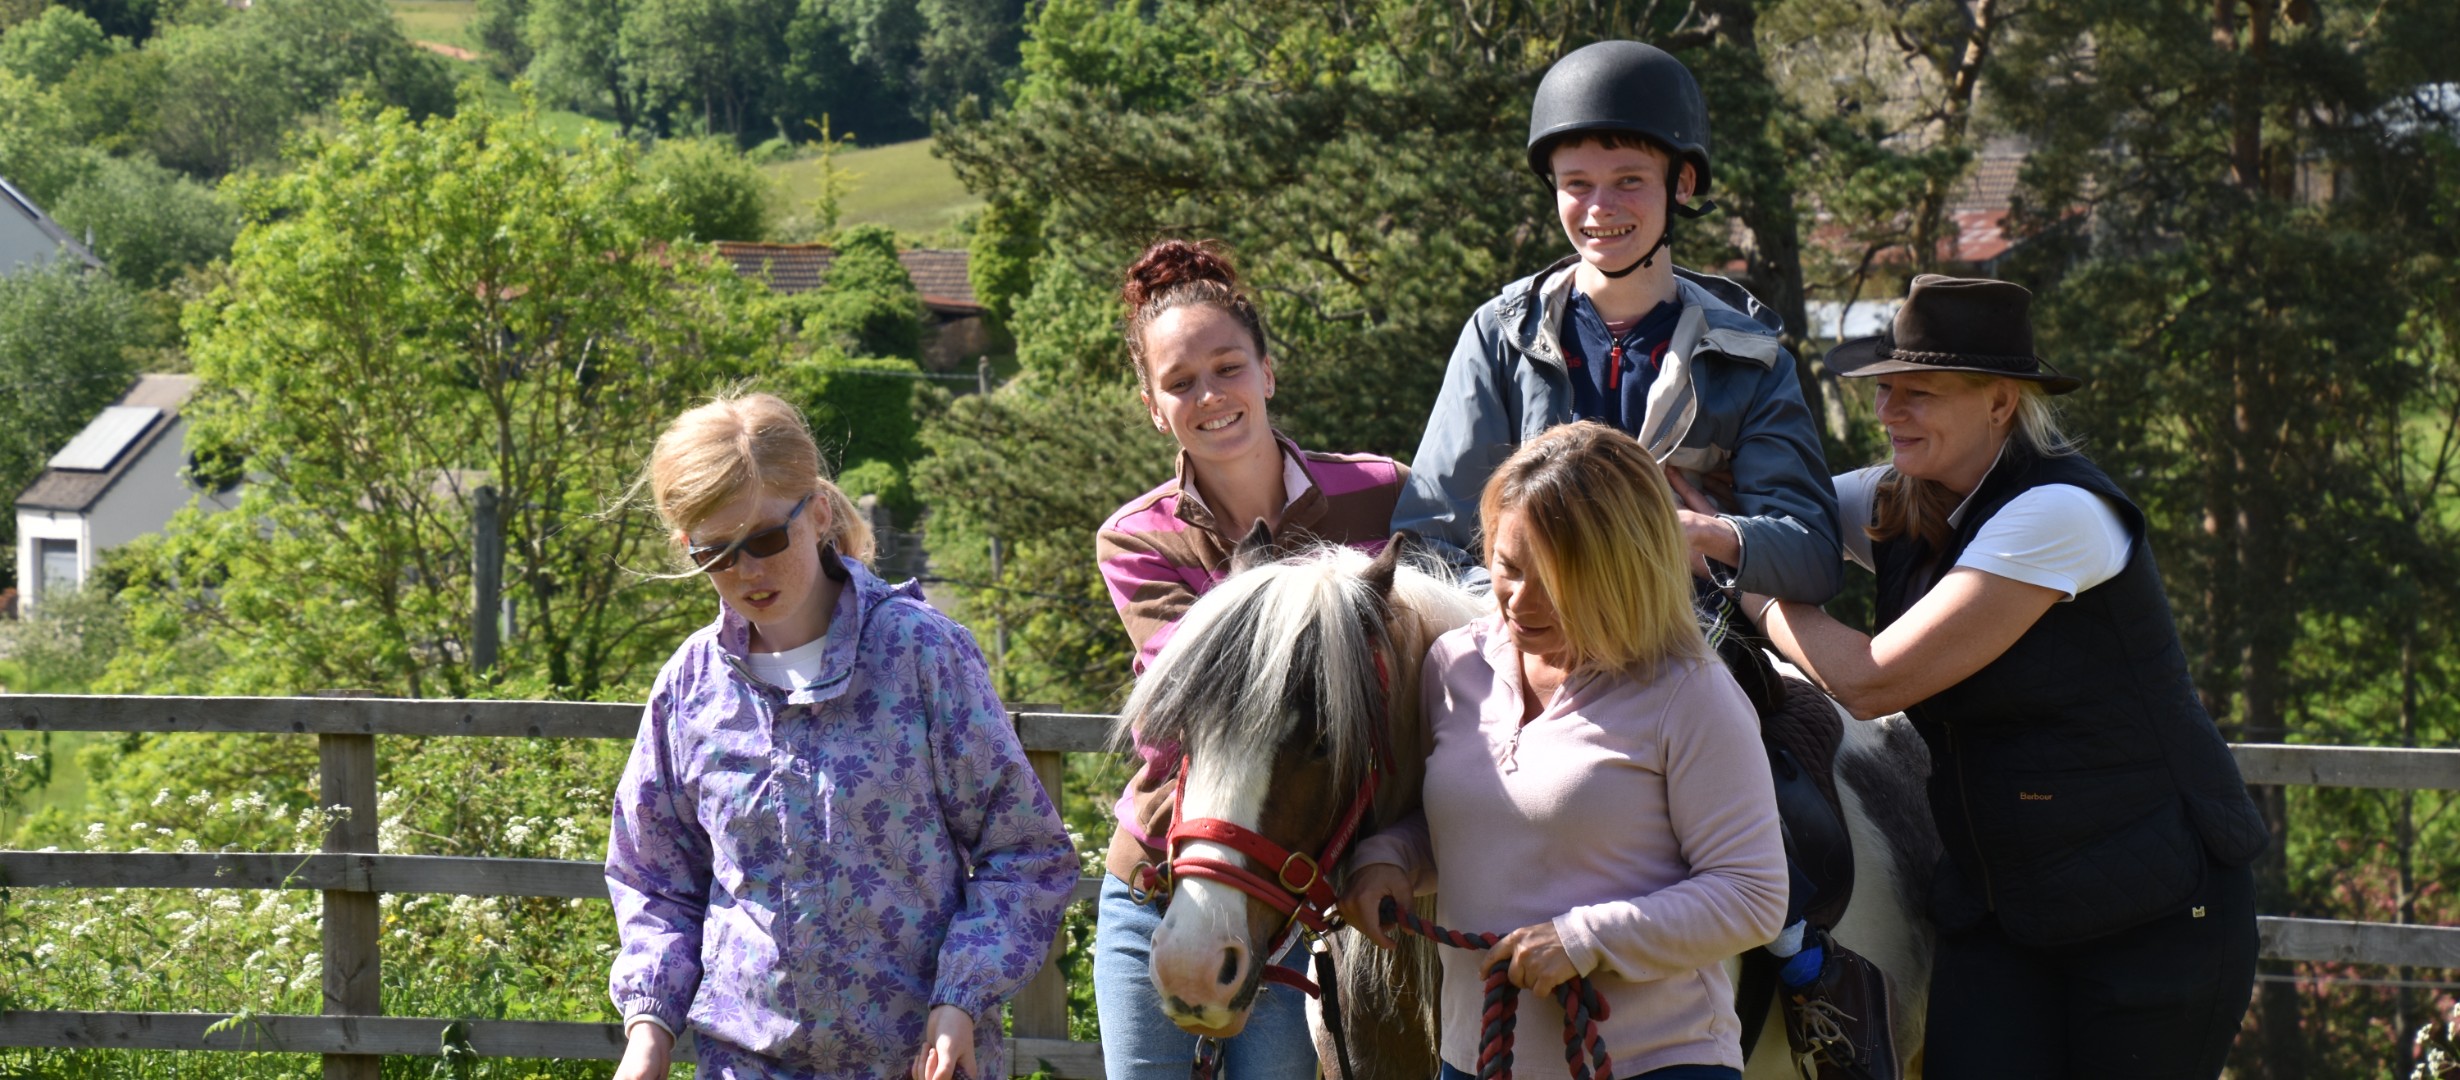 A young person riding a horse supported by three adults walking alongside the horse. The horse is being led by a young person